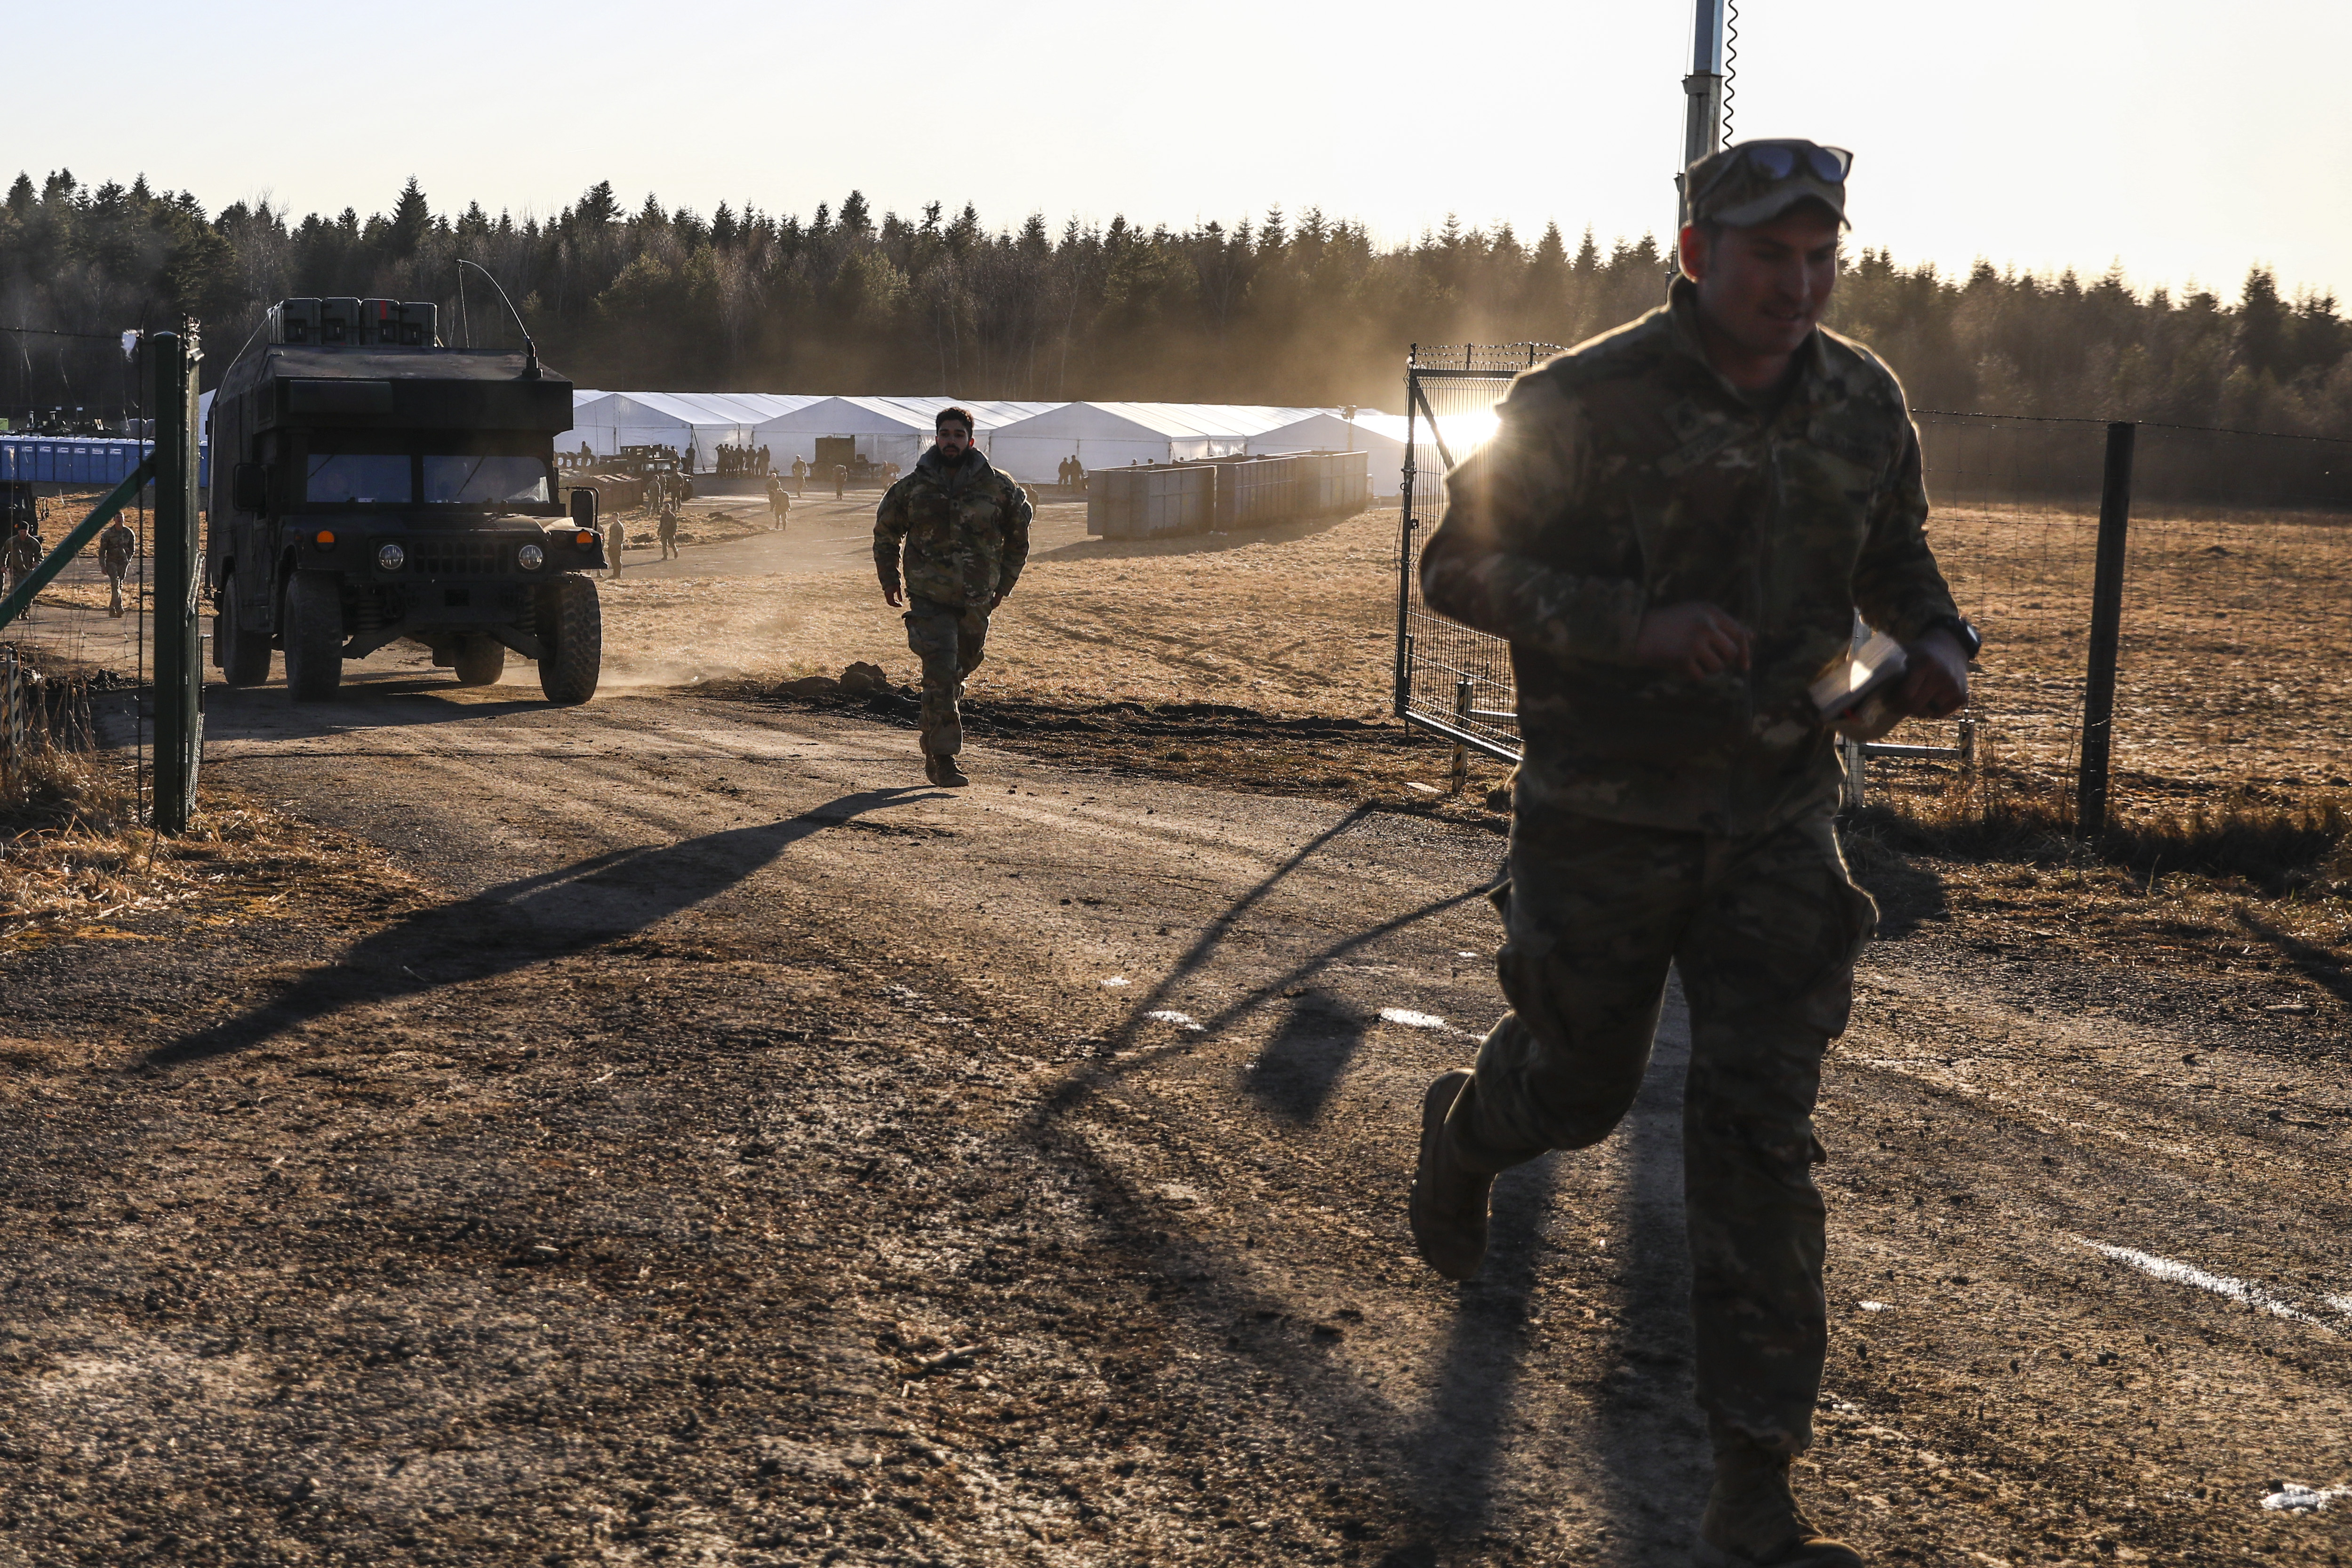 US soldiers of the 82nd Airborne Division and military vehicles are seen at a temporary base in Wola Korzeniecka, Poland on February 24. 